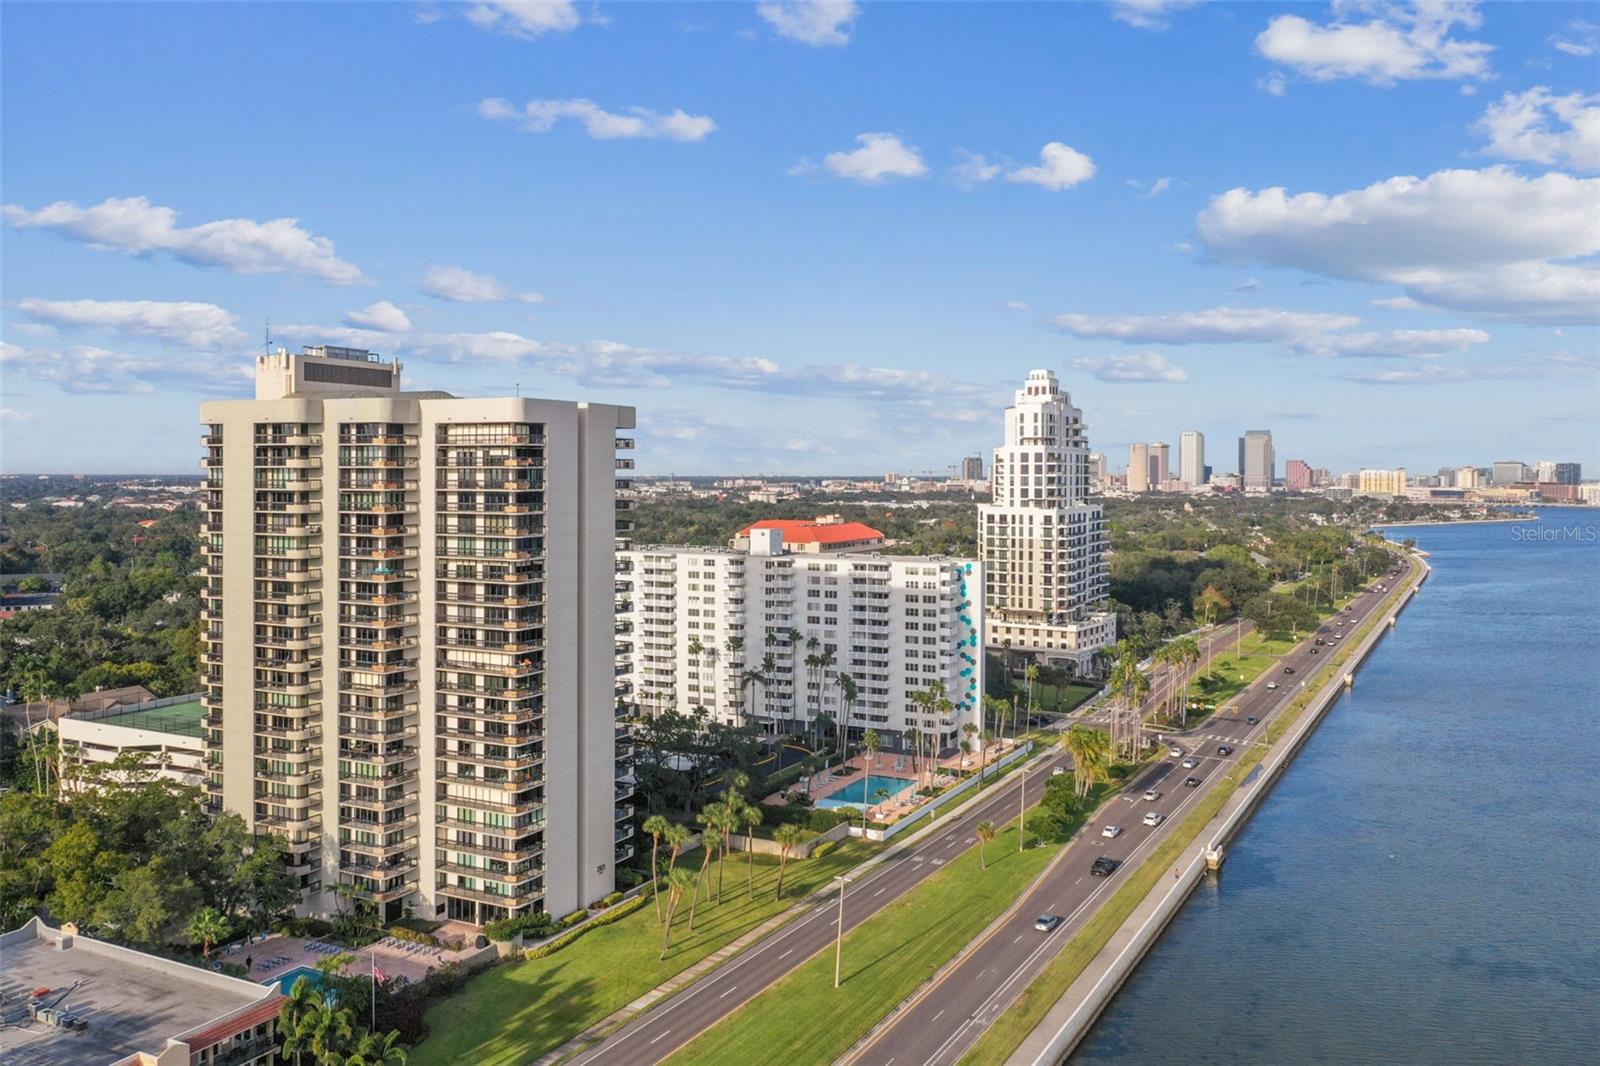 The Atrium: 14th floor condo with a private balcony and direct water views of Tampa Bay